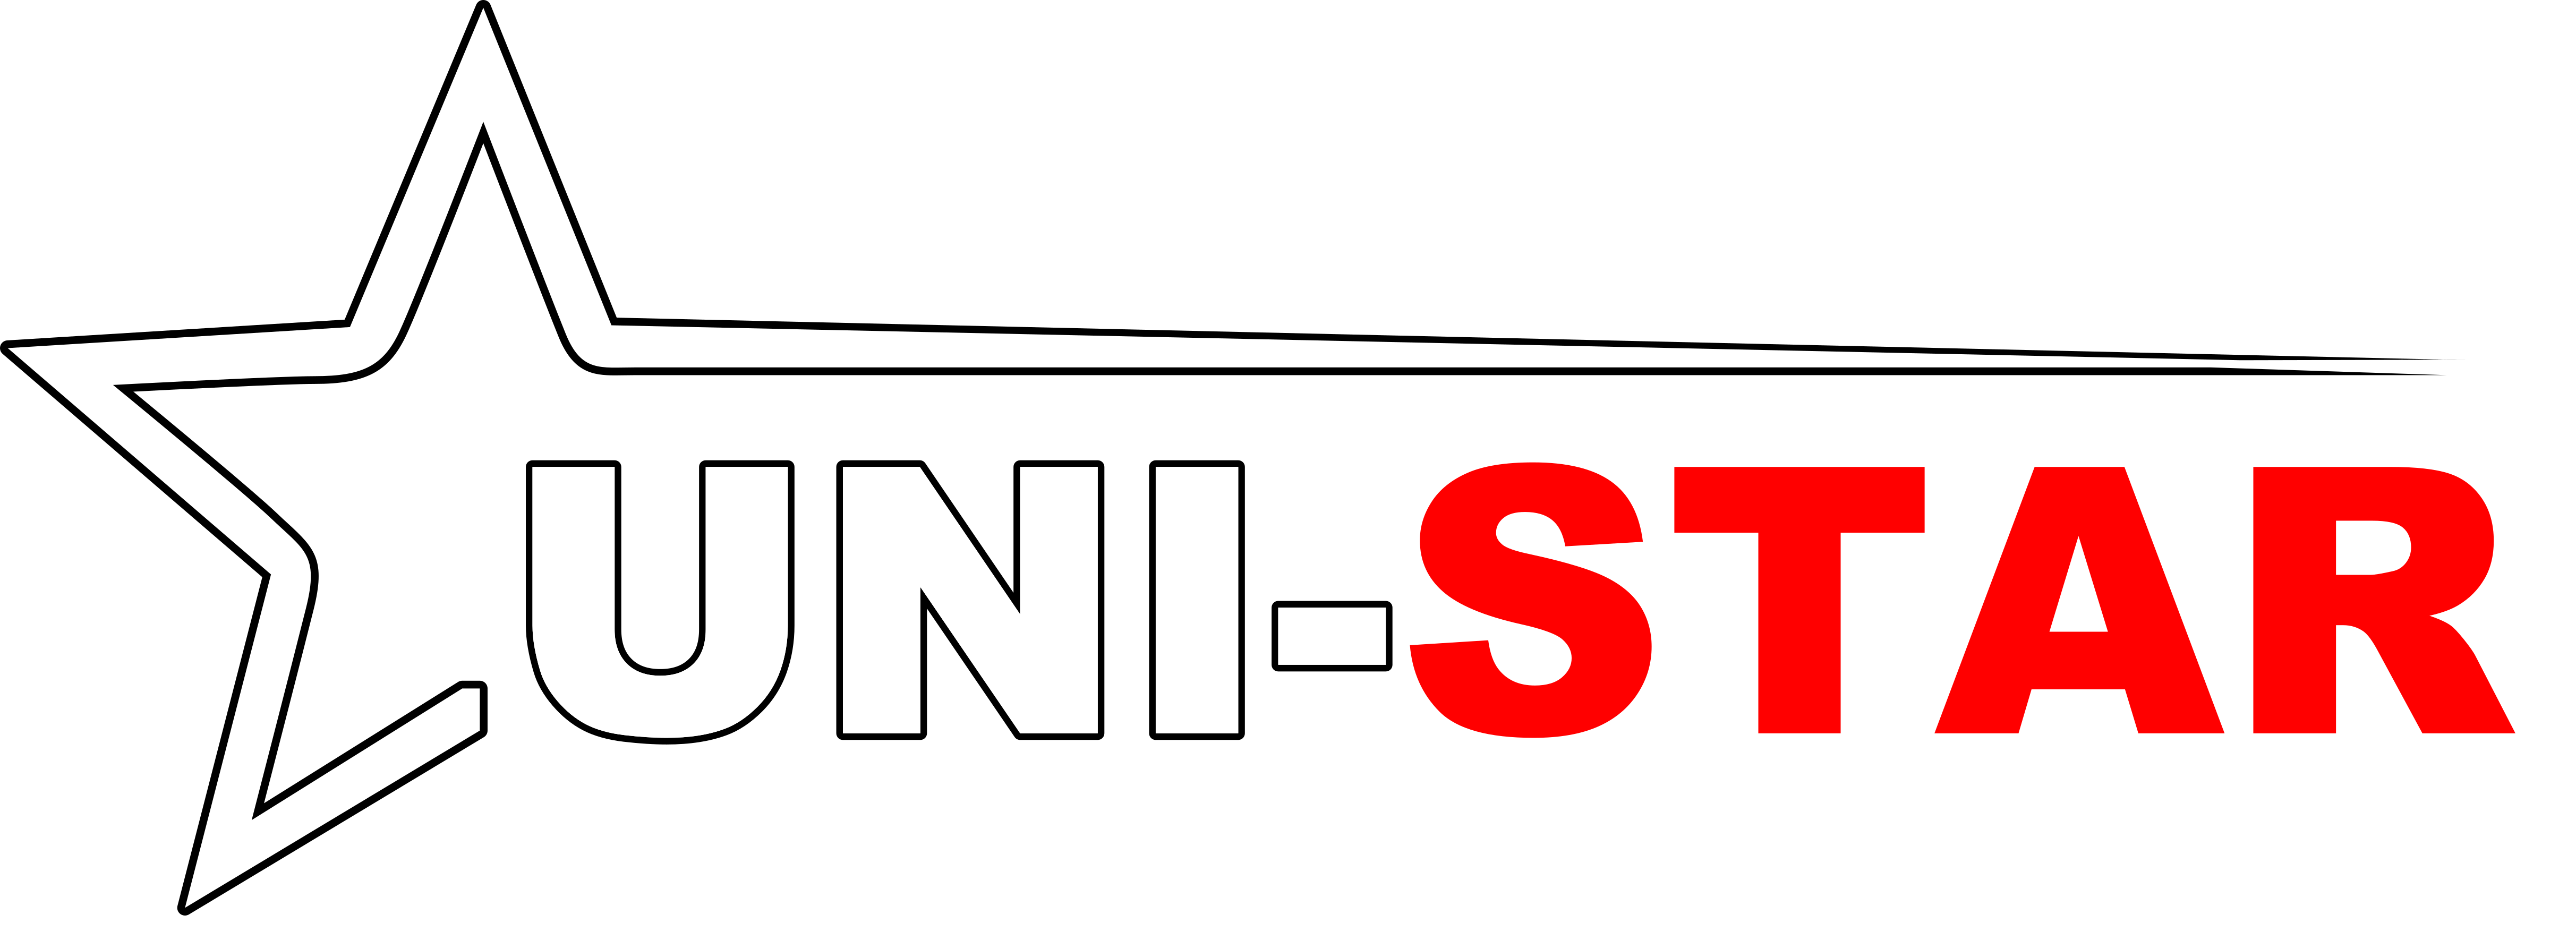 Unistar Cleaning offers house cleaning services in Manchester NH and surrounding areas.